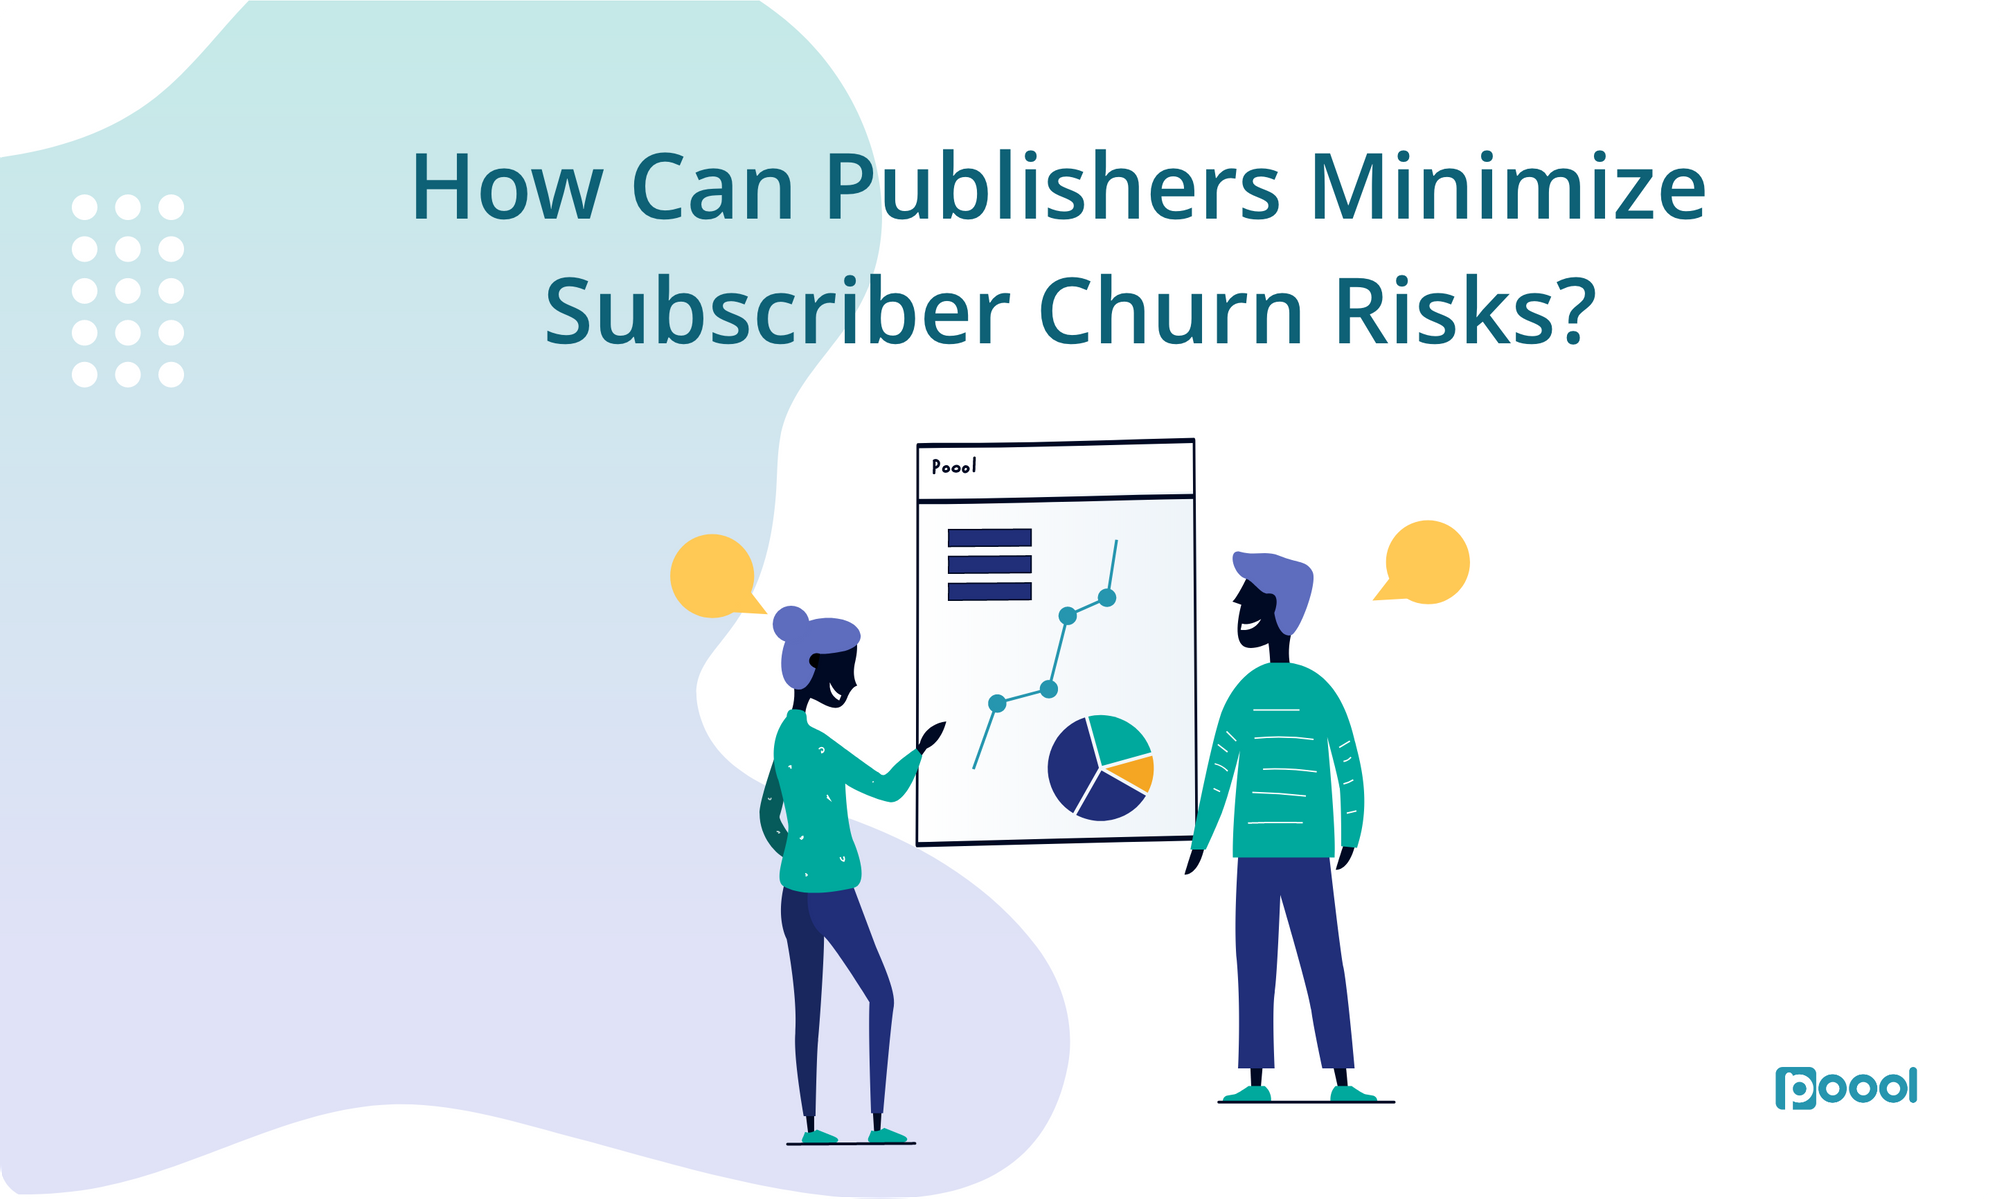 How Can Publishers Minimize Subscriber Churn Risks?